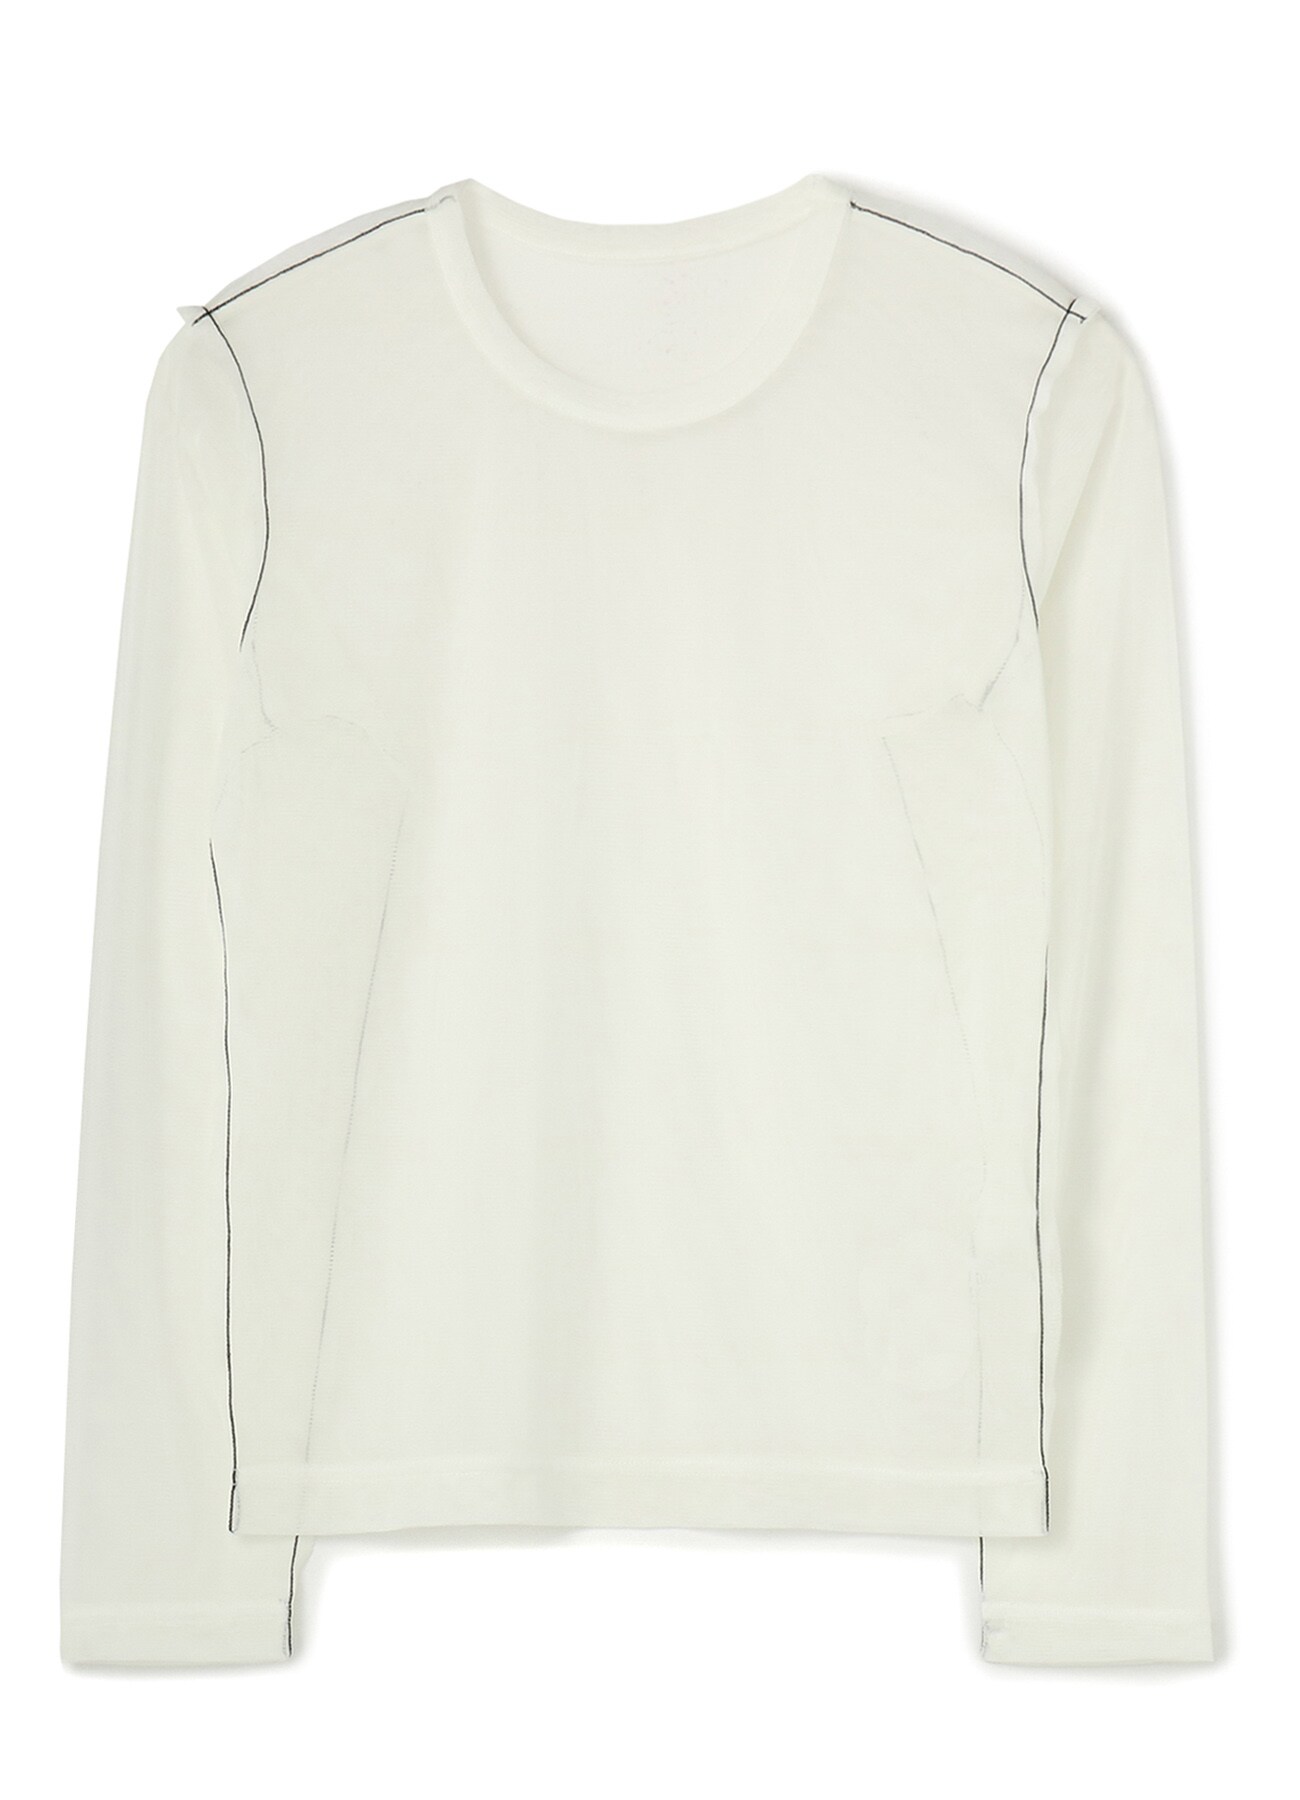 TULLE CHAIN STITCH LONG SLEEVE T